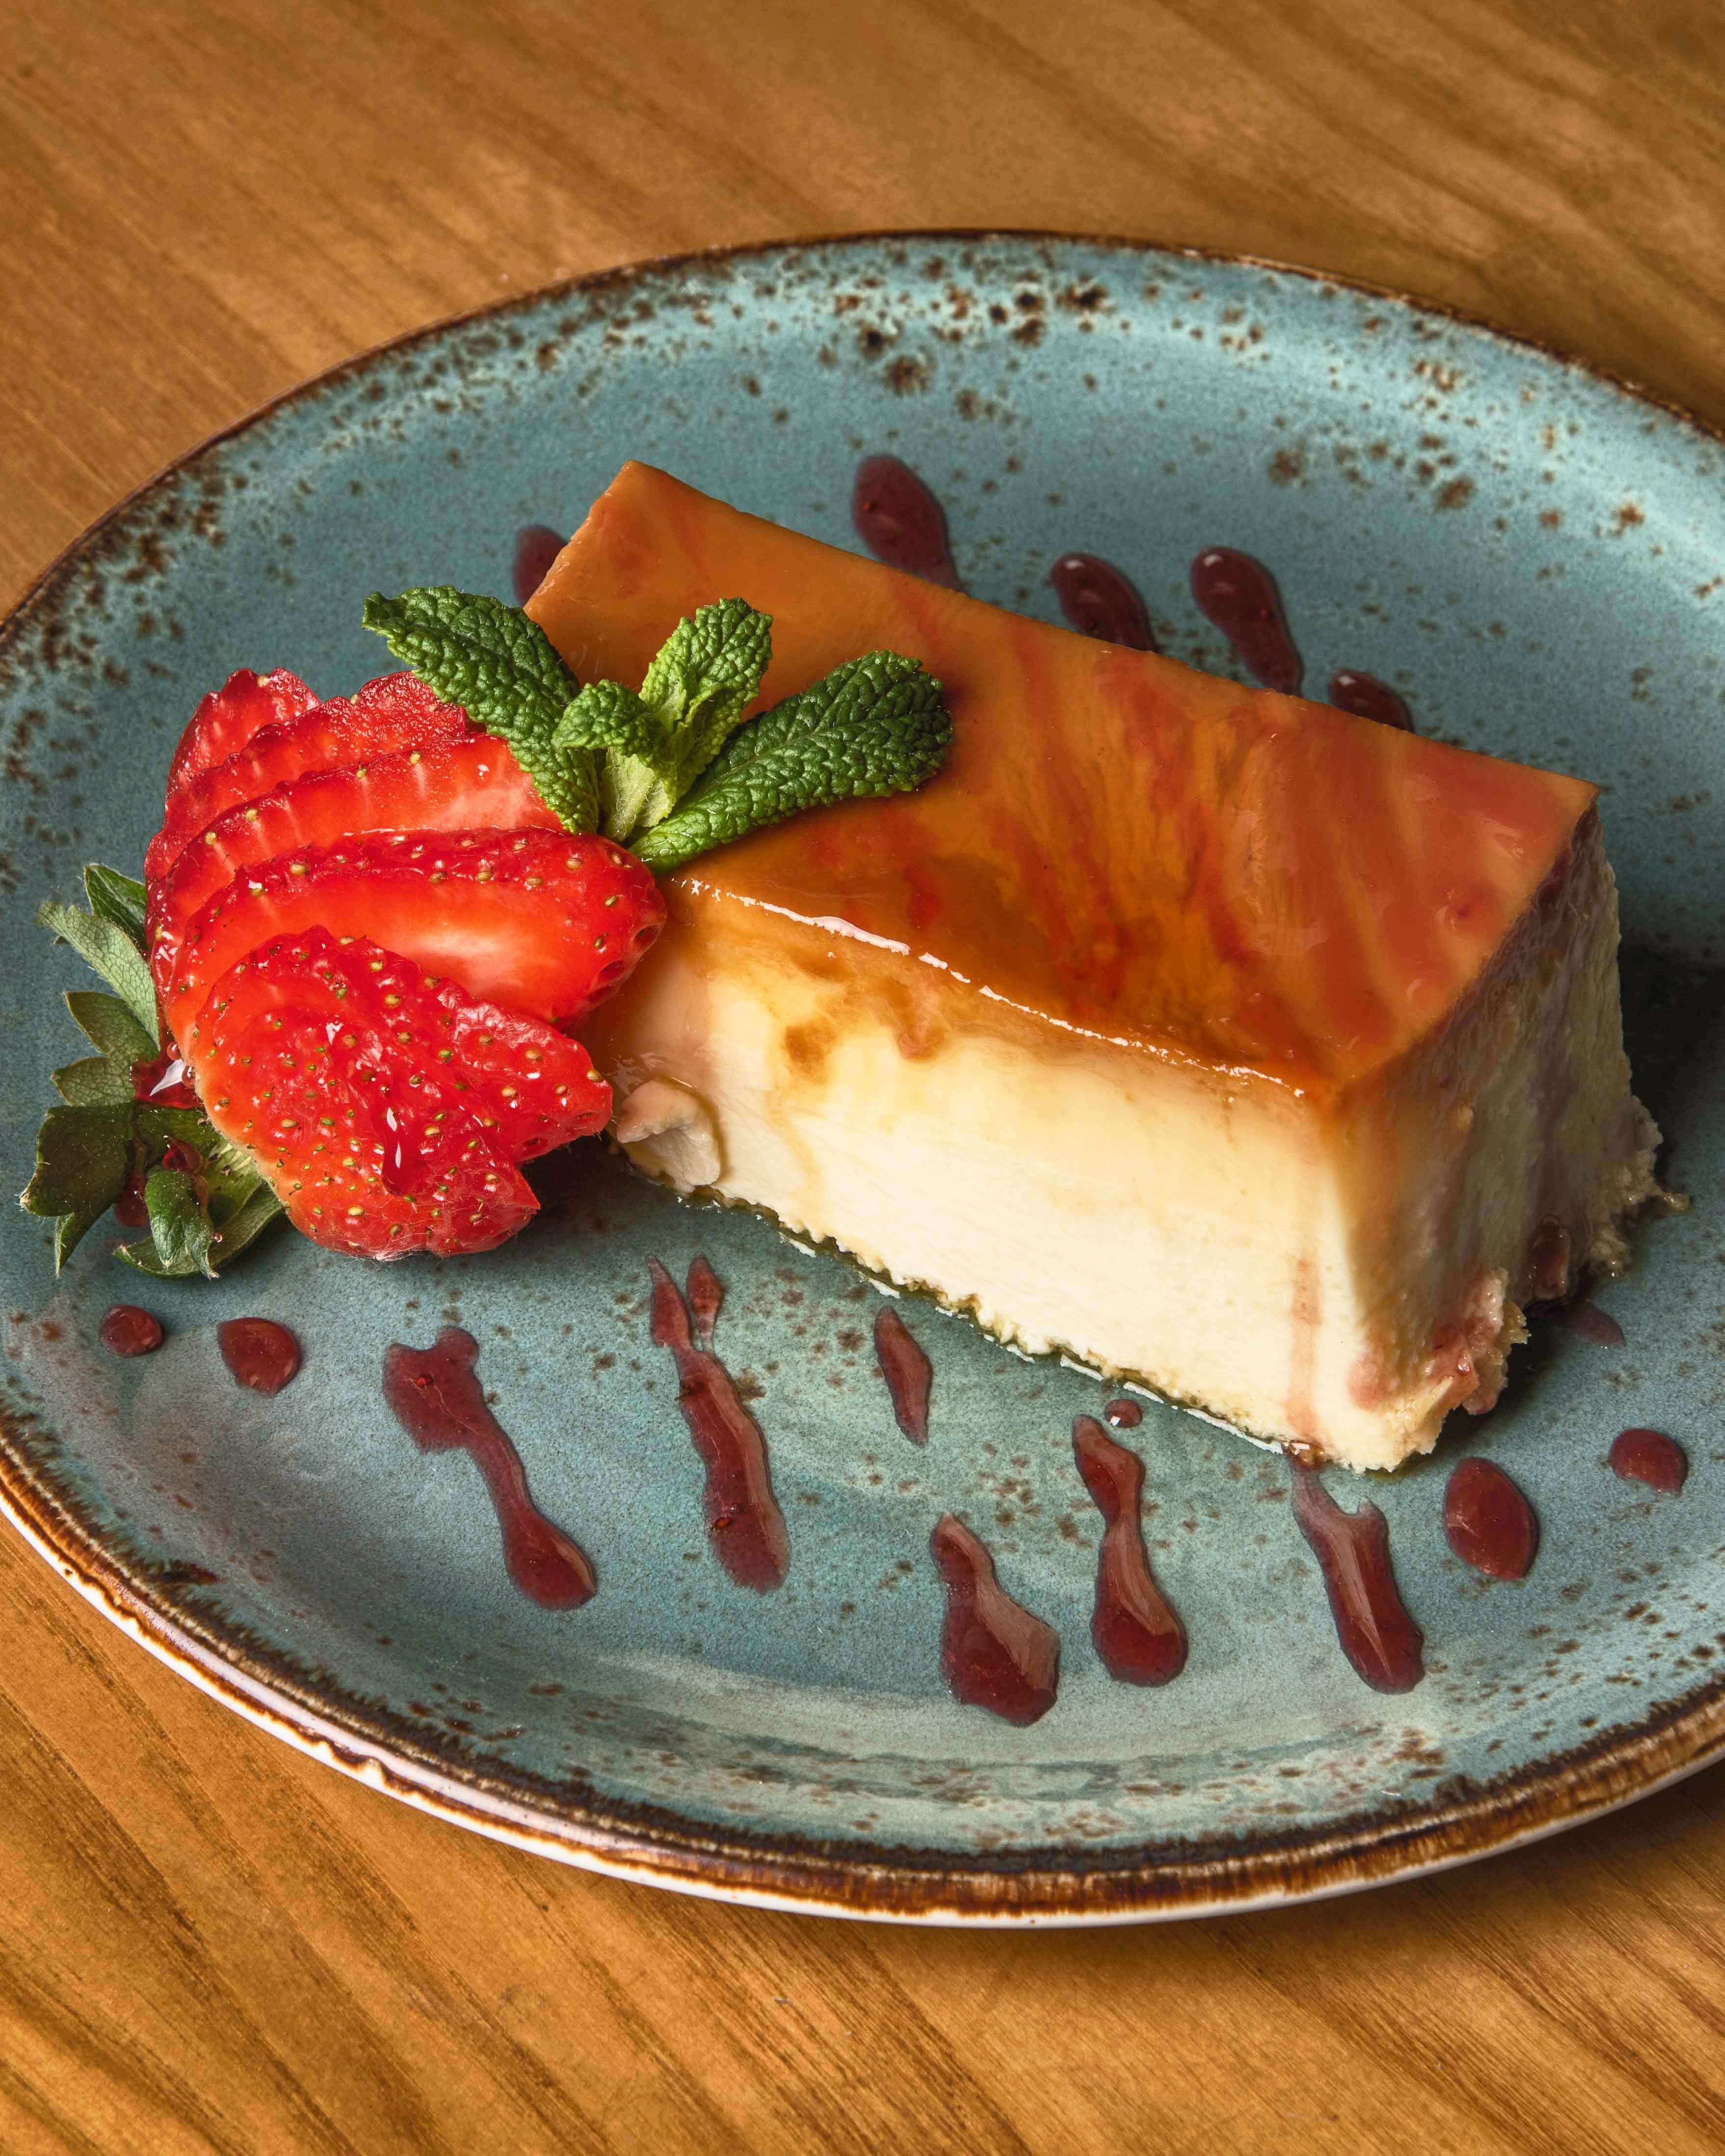 Traditional cheese crème caramel with caramel sauce